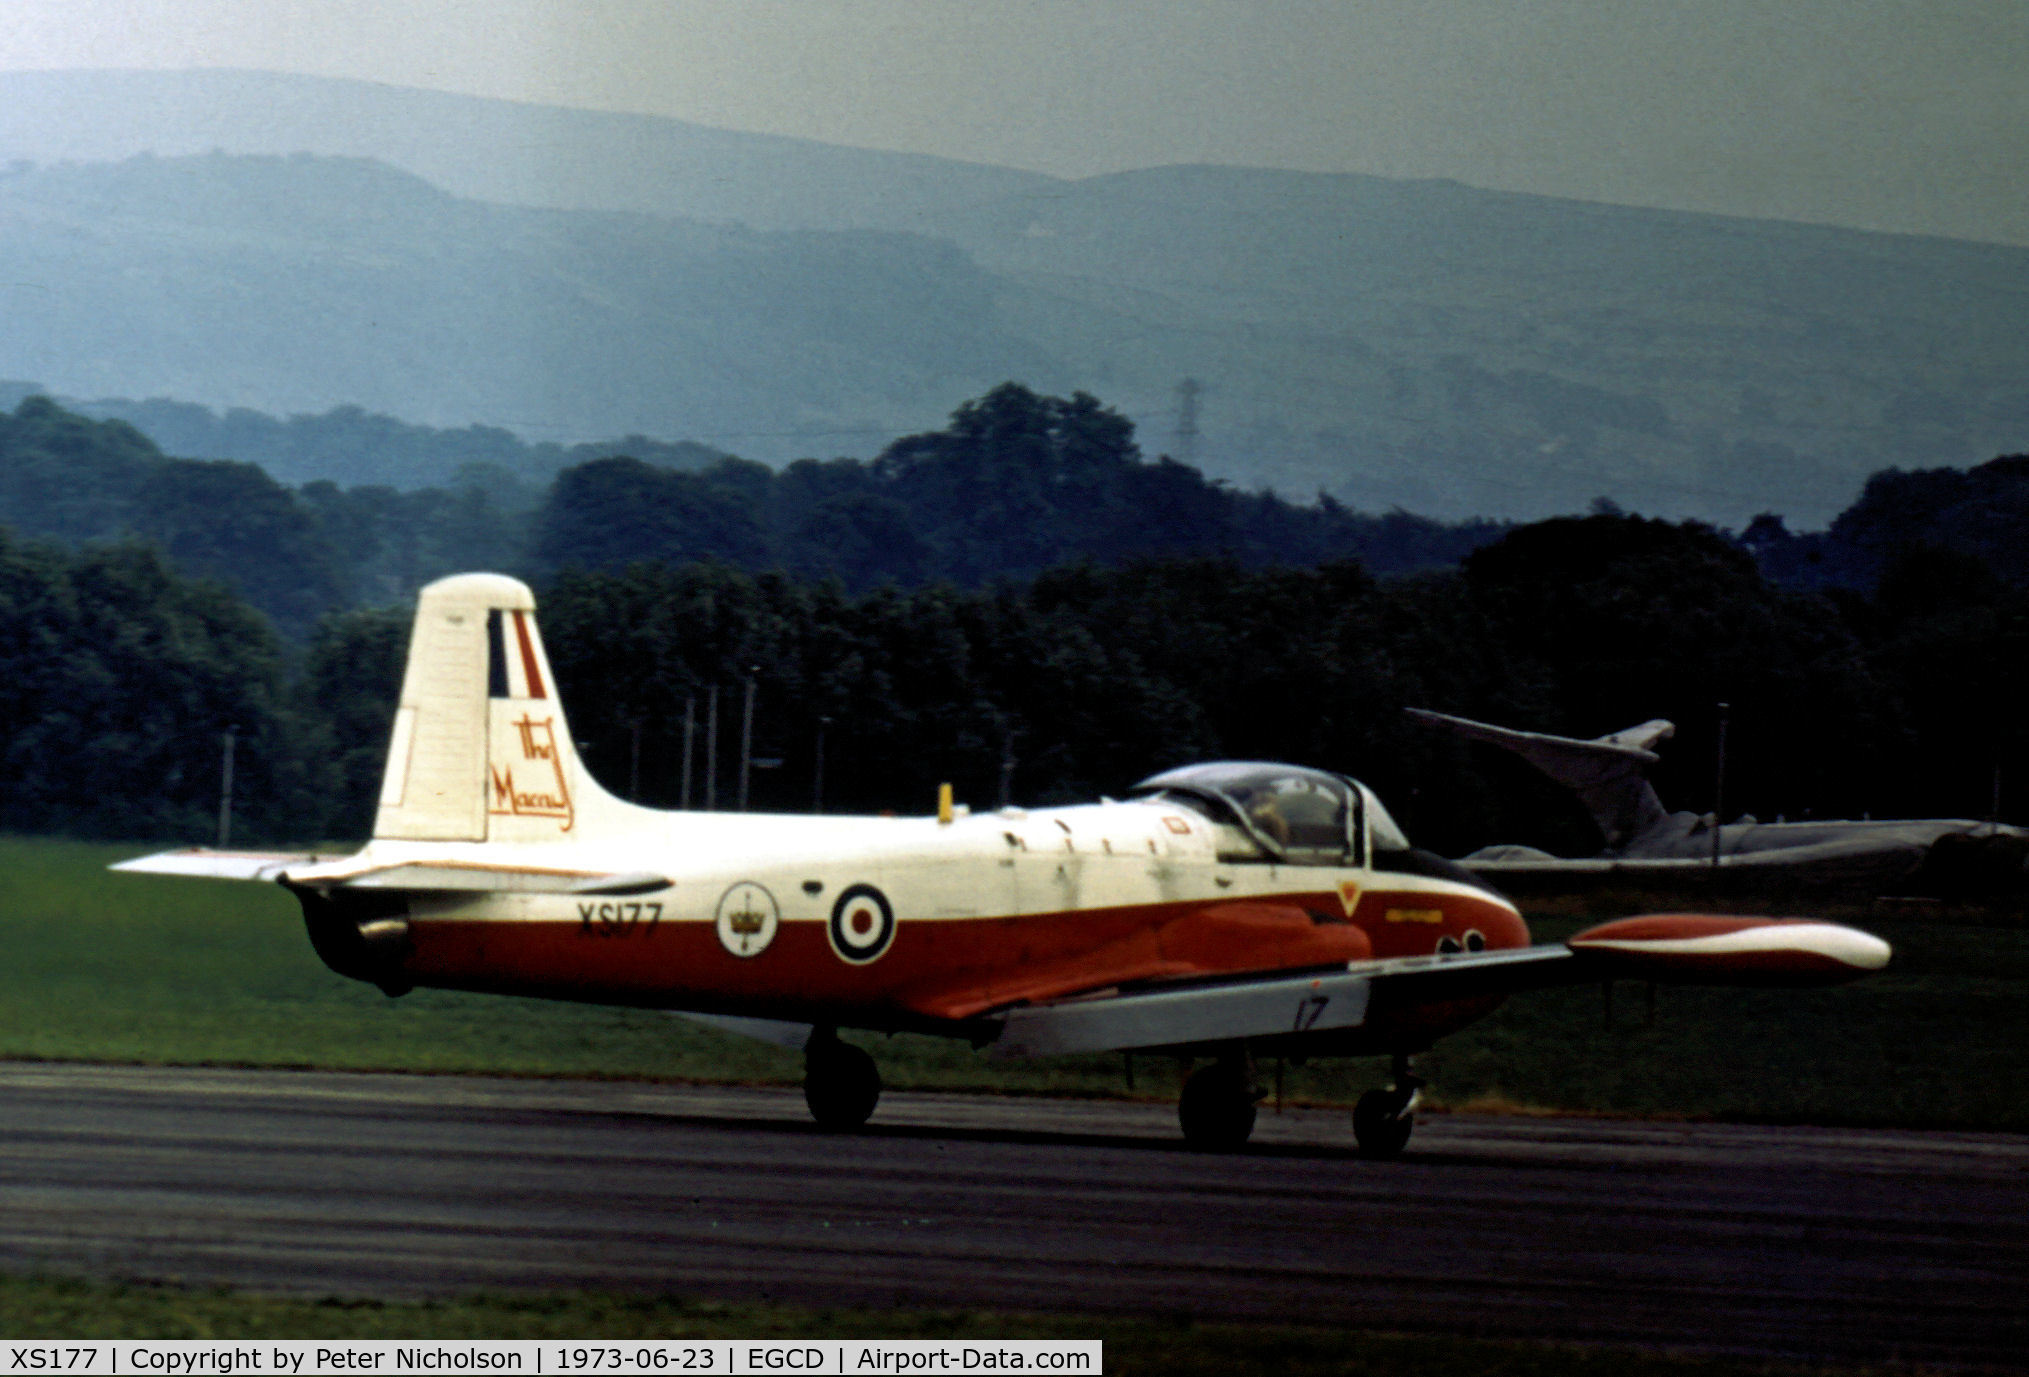 XS177, 1963 BAC 84 Jet Provost T.4 C/N PAC/W/22163, Jet Provost T.4 of the Macaws aerobatic display team as seen at the 1973 Royal Air Force Association Airshow at Woodford.